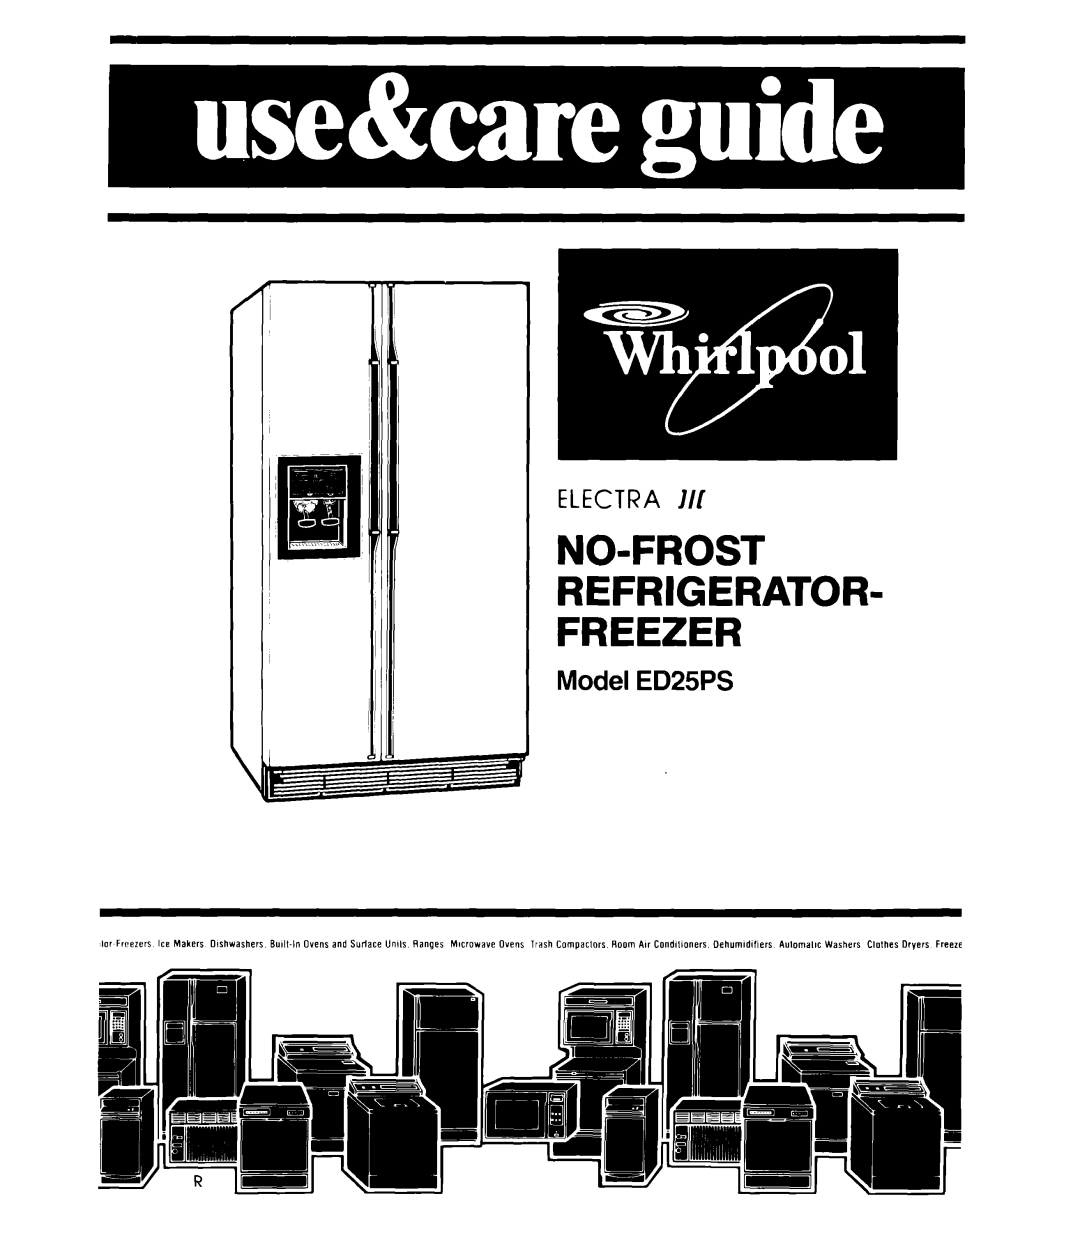 Whirlpool manual Model ED25PS, No-Frost Refrigerator Freezer, Electra 